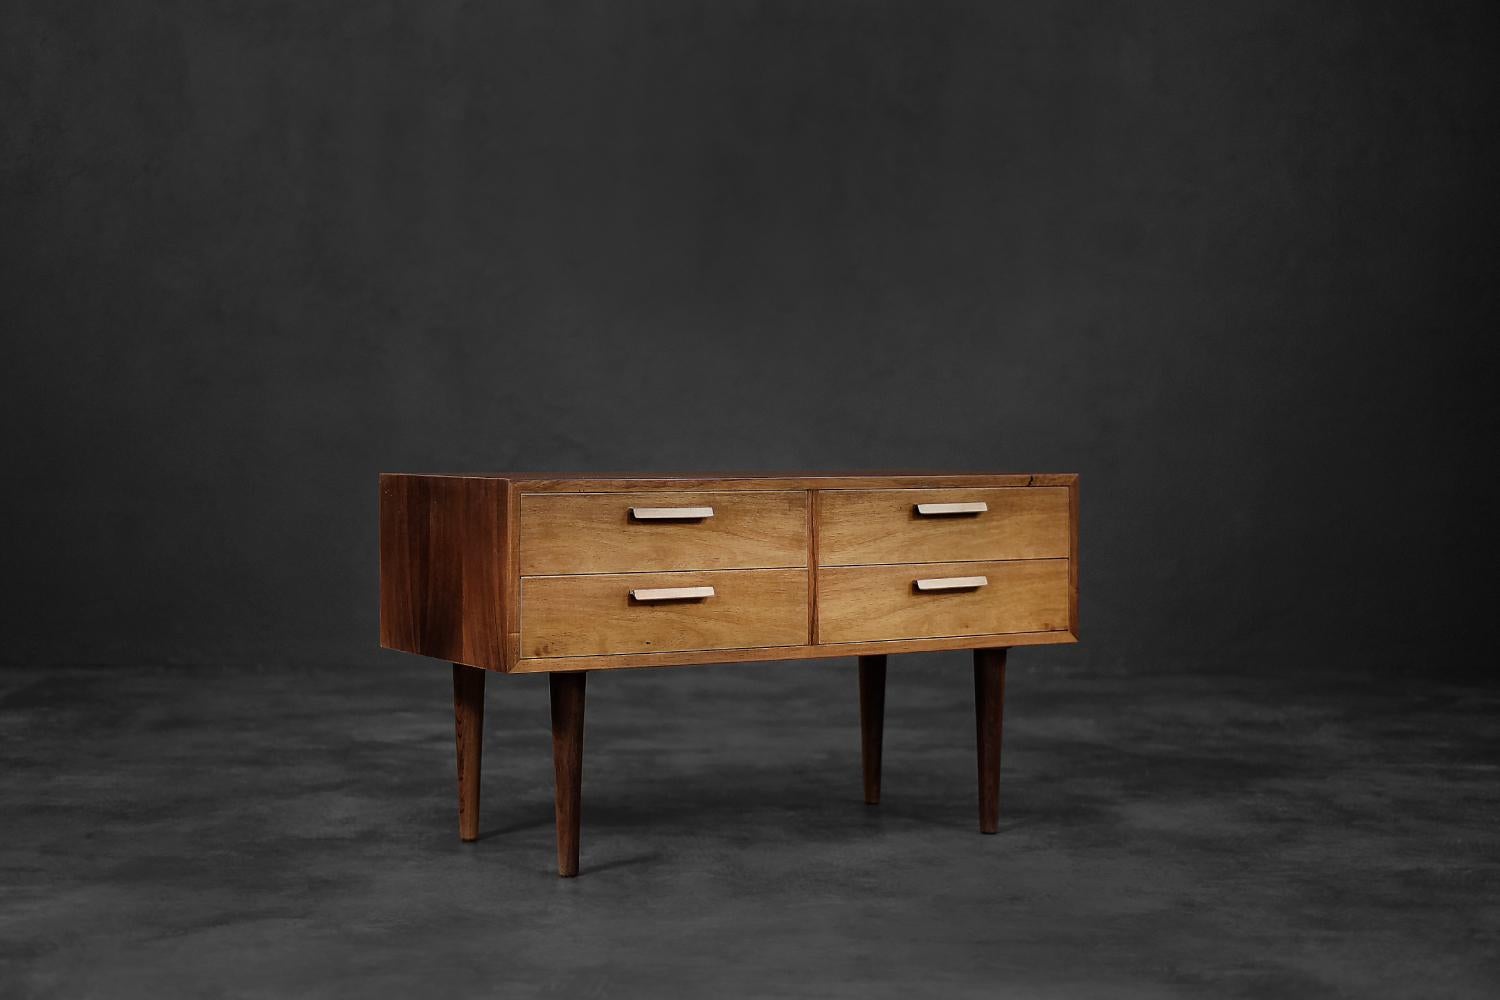 This elegant chest of drawers was designed during the 1960s by Kai Kristiansen for the Danish manufactory Feldballes Møbelfabrik. It is made of high-quality, noble rosewood with rich graining. The chest of drawers has four drawers, and the fronts